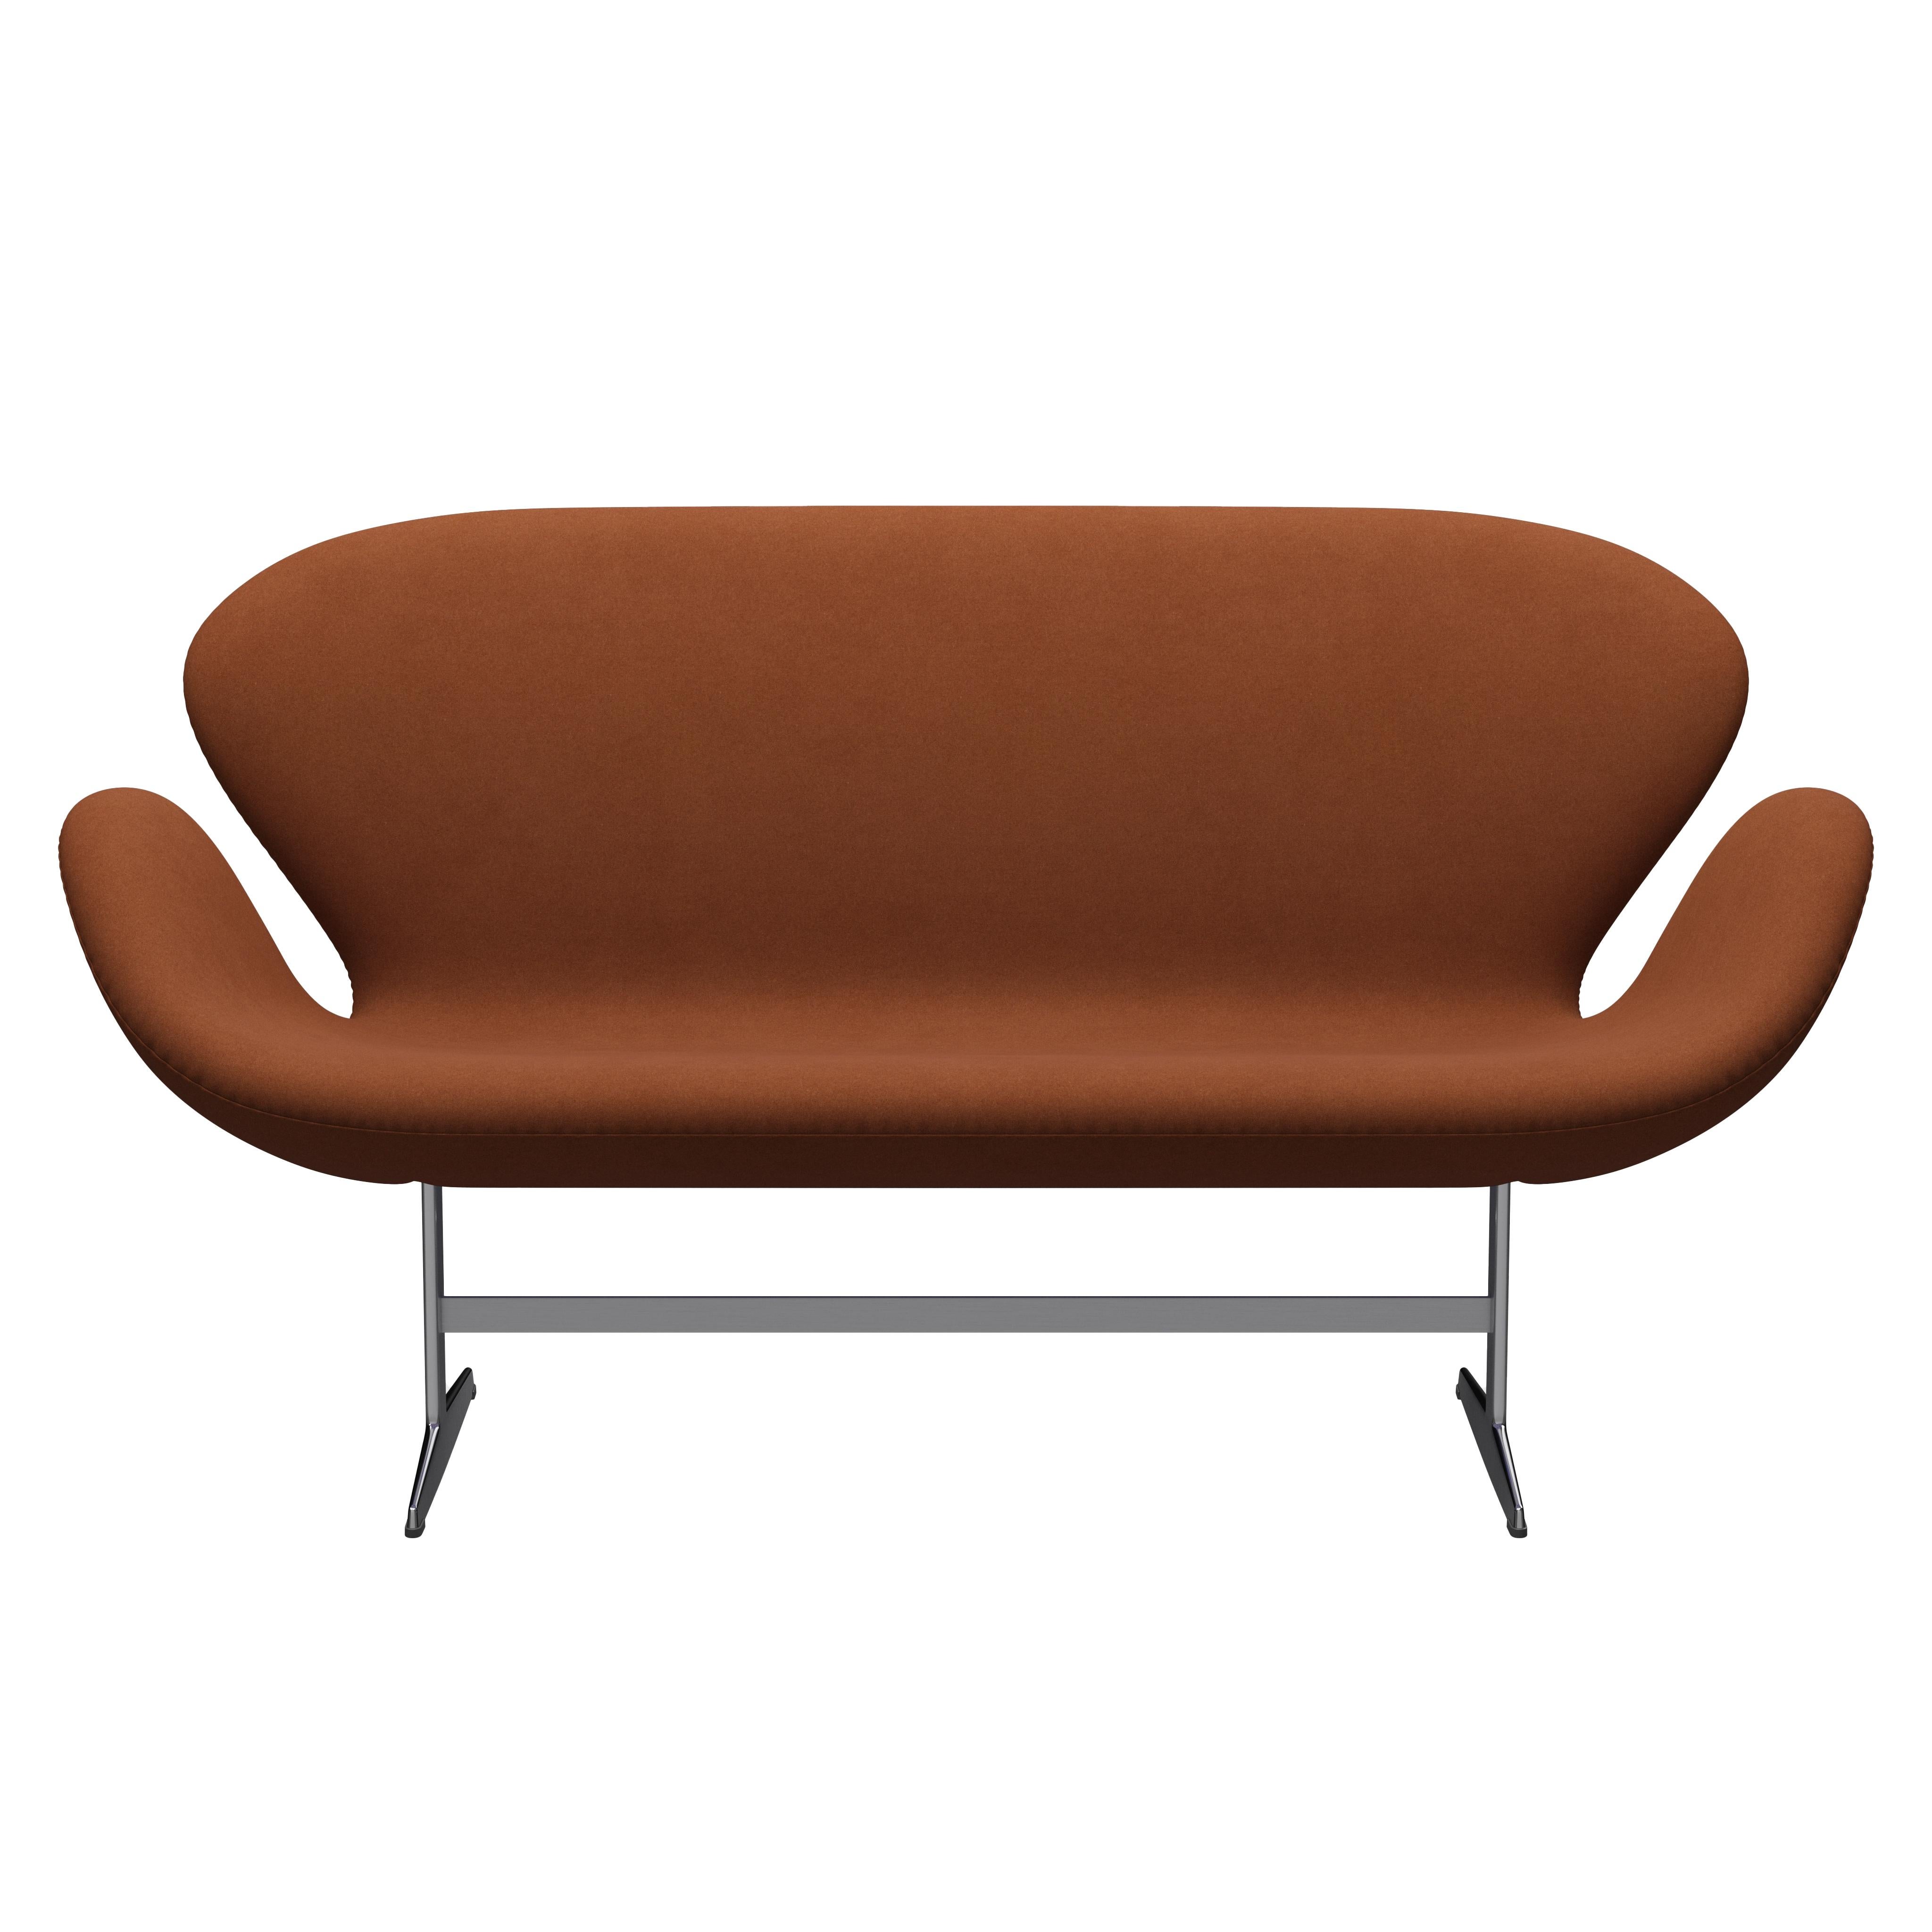 Arne Jacobsen 'Swan' Sofa for Fritz Hansen in Fabric Upholstery (Cat. 2) In New Condition For Sale In Glendale, CA